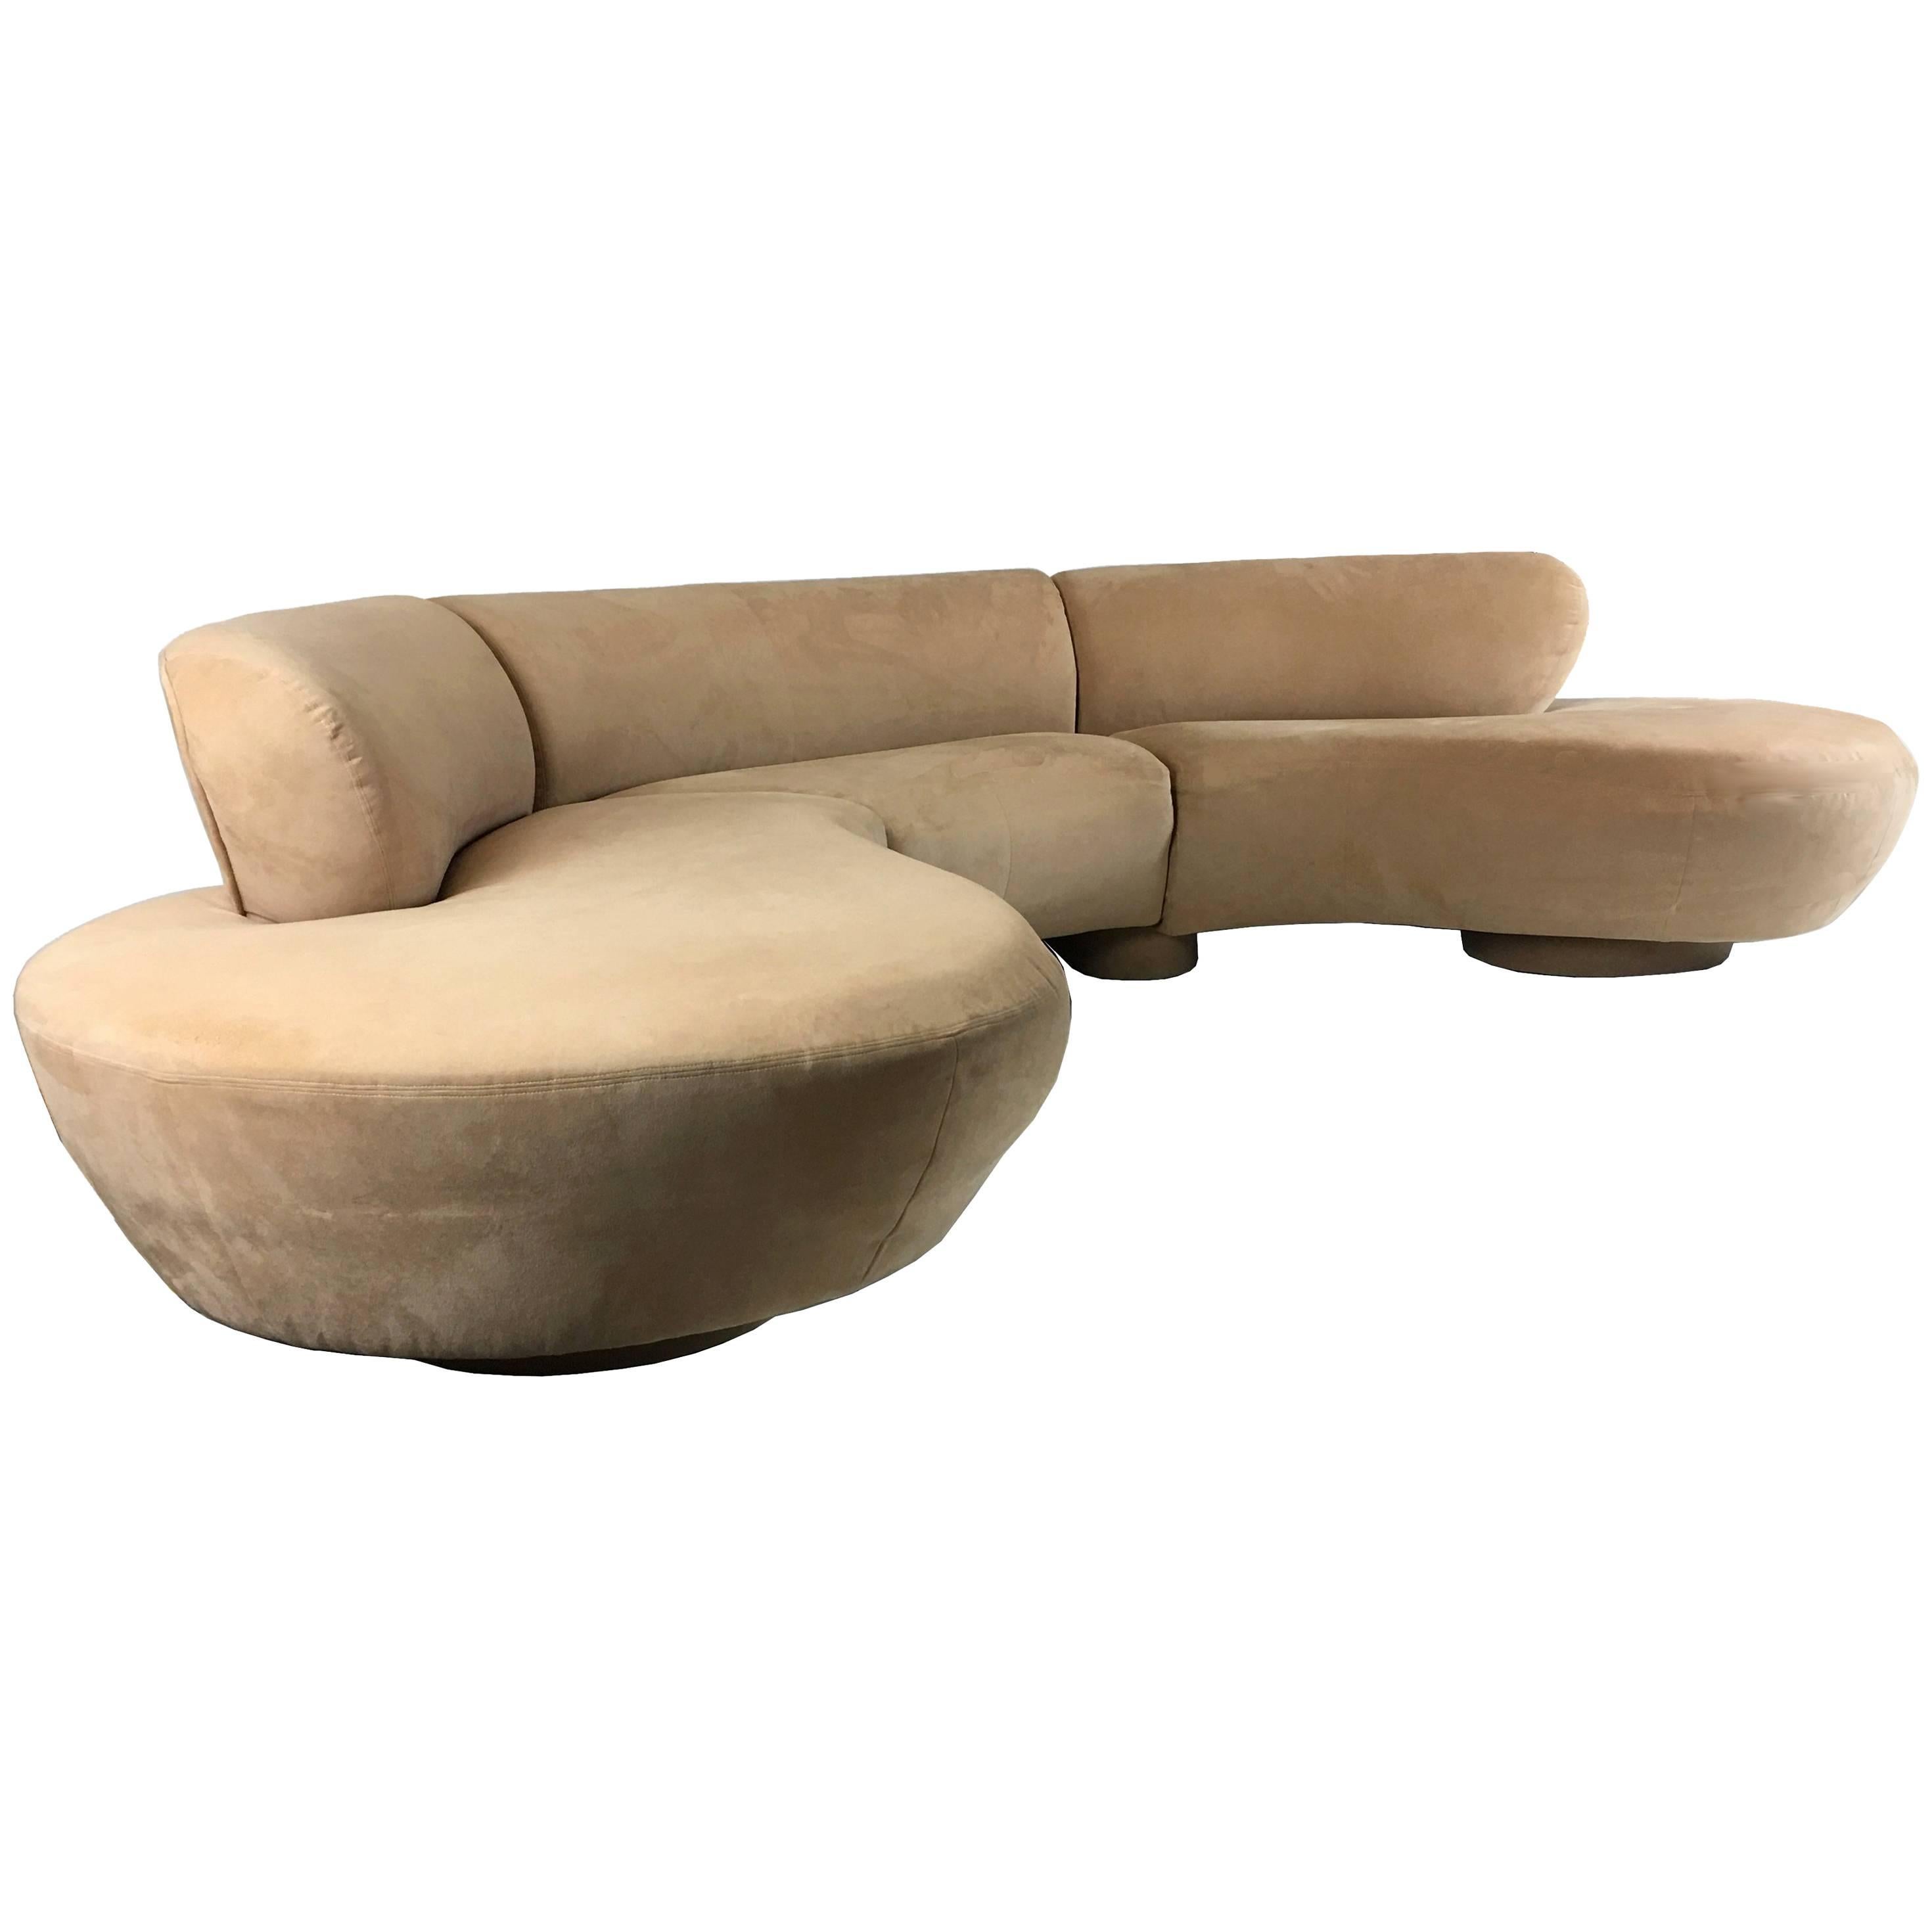 Three-Piece Cloud Sofa Sectional by Vladimir Kagan for Directional